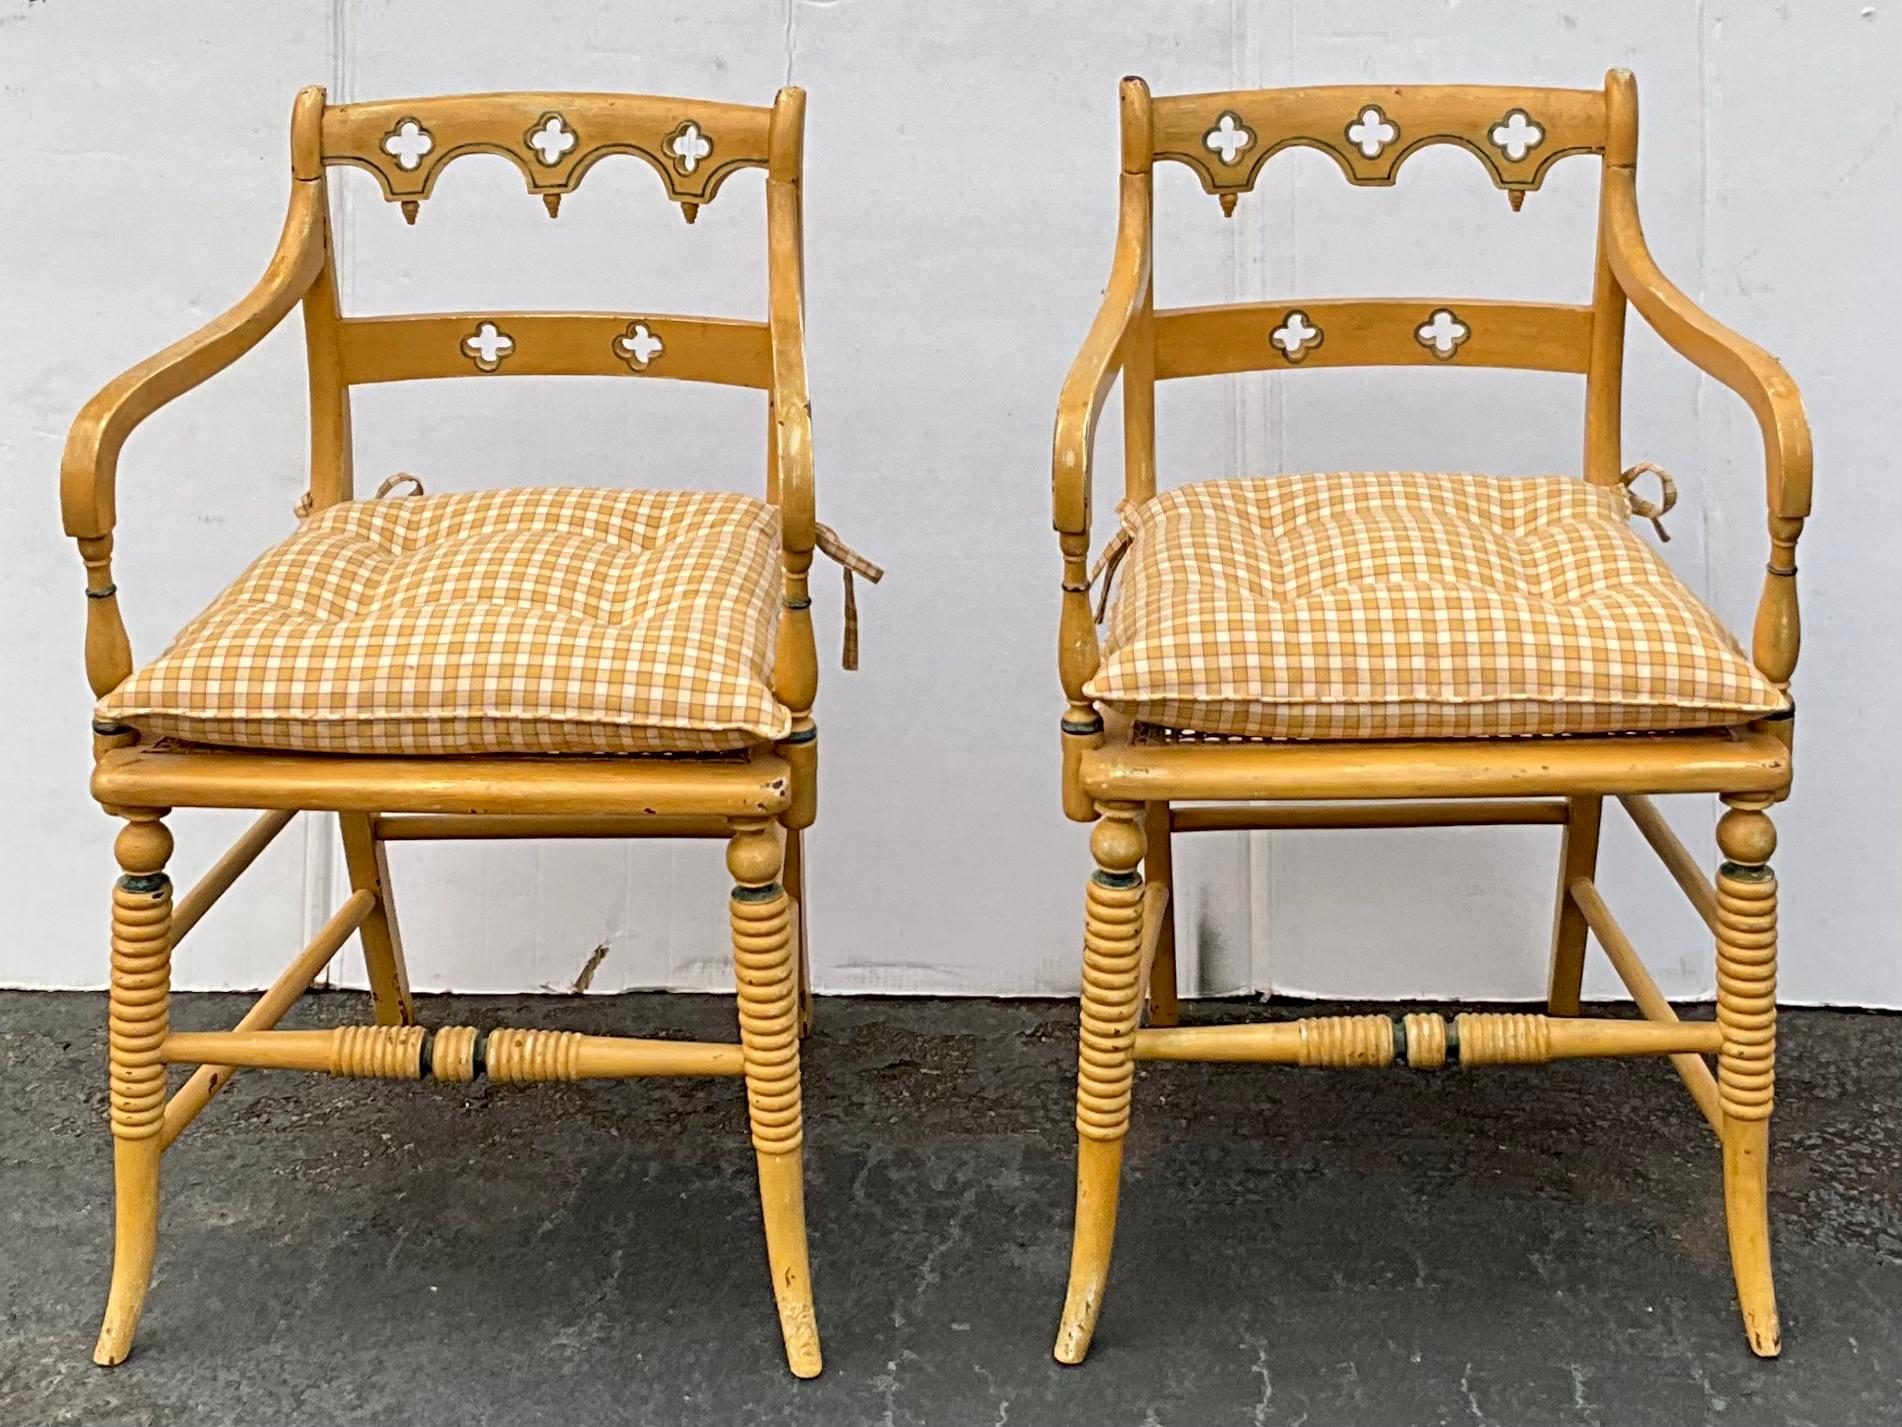 20th Century Early 20th-C. English Regency Style Carved & Painted Cane Bergere Chairs - Pair